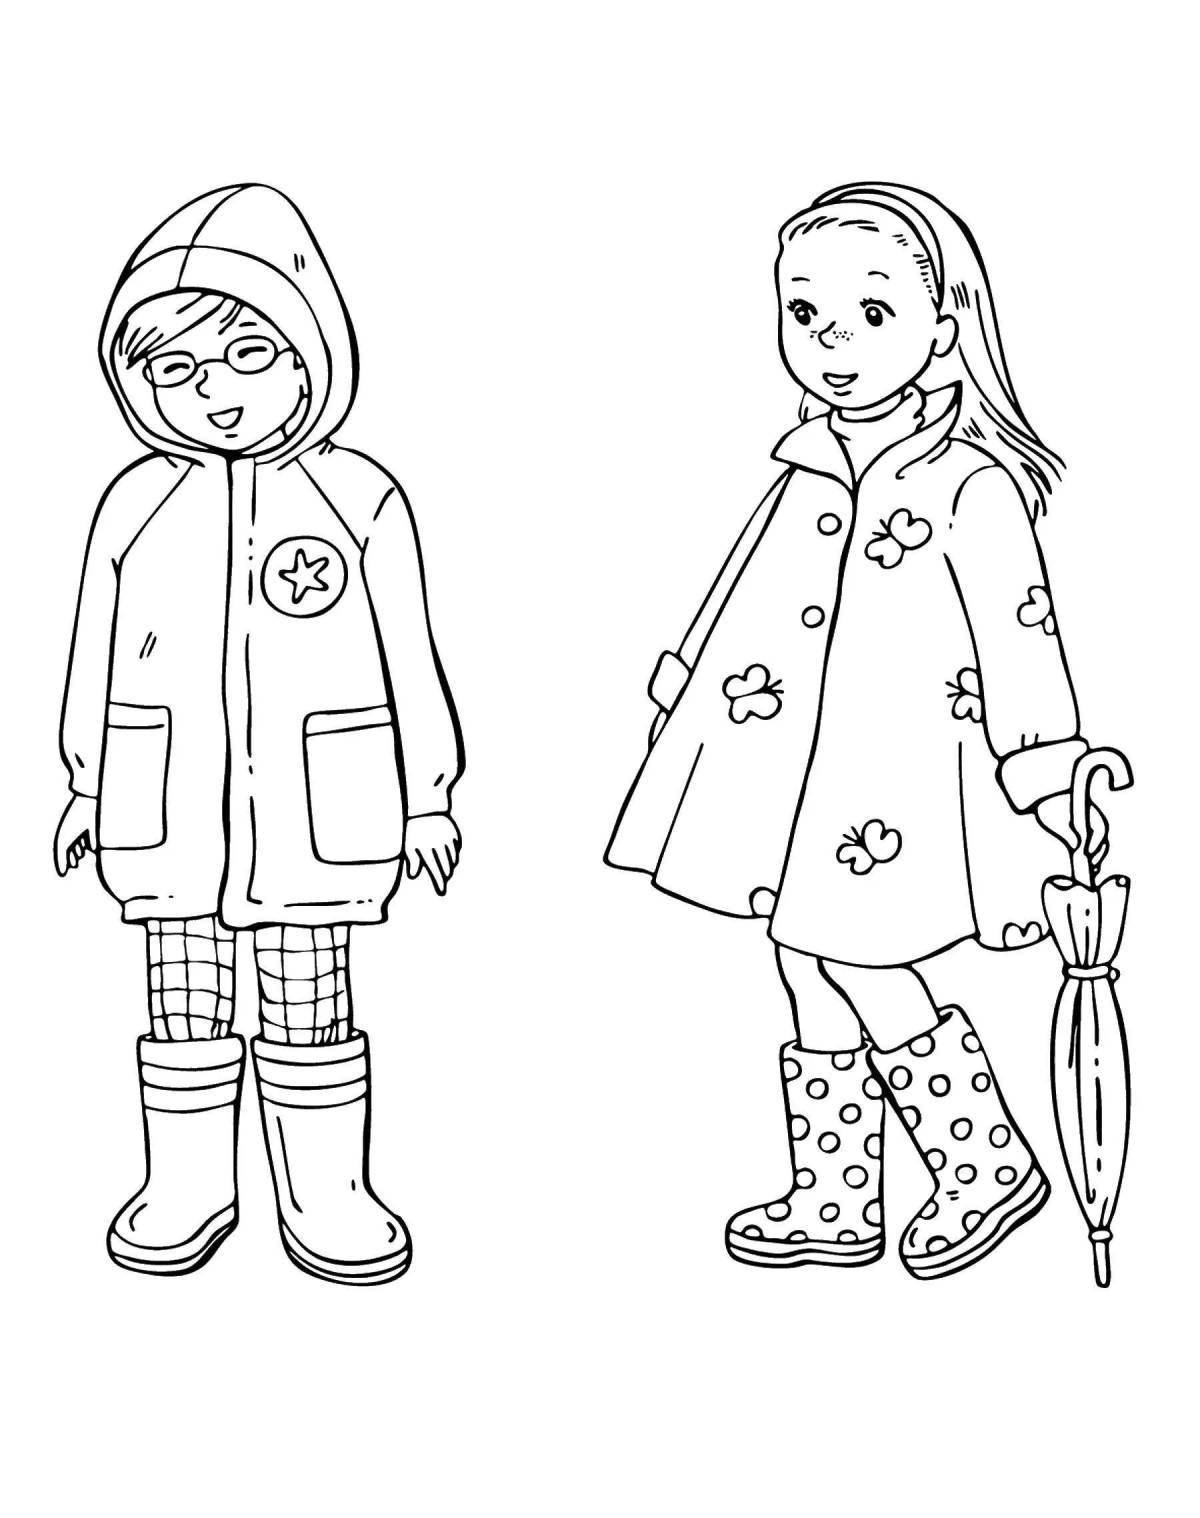 Fun coloring page for winter clothes for 3-4 year olds